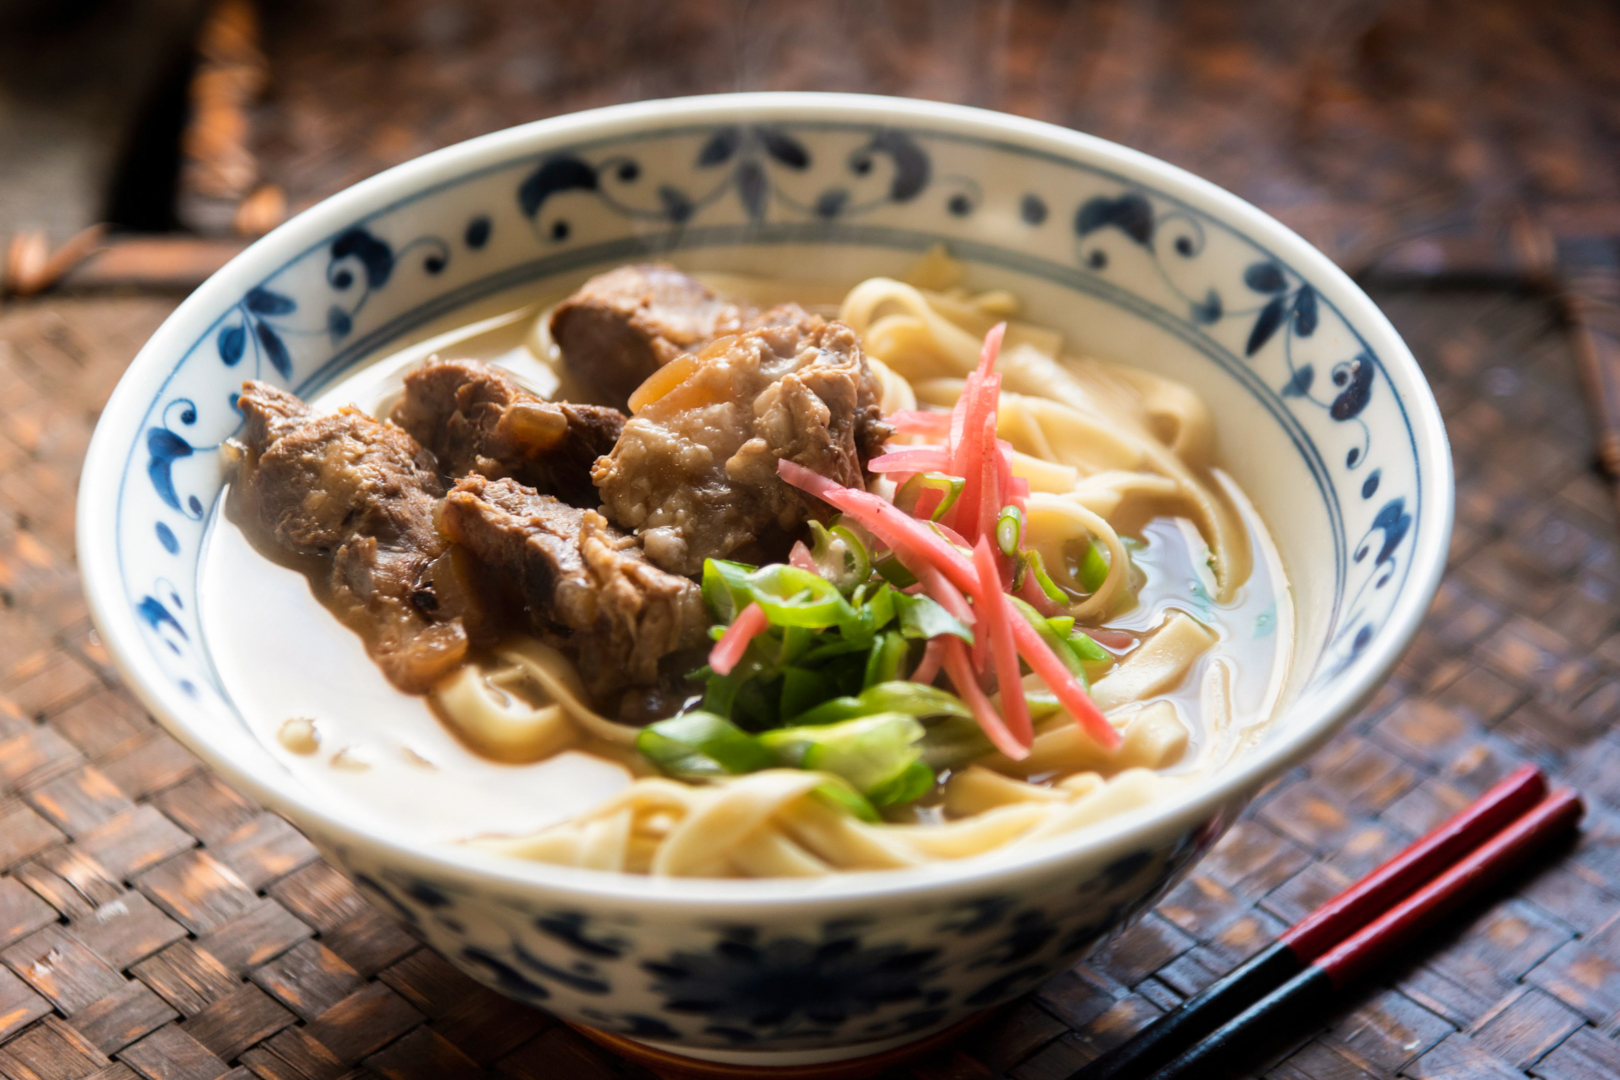 Okinawa food: A bowl of Okinawan noodles topped with pork, pickled ginger and green onions.